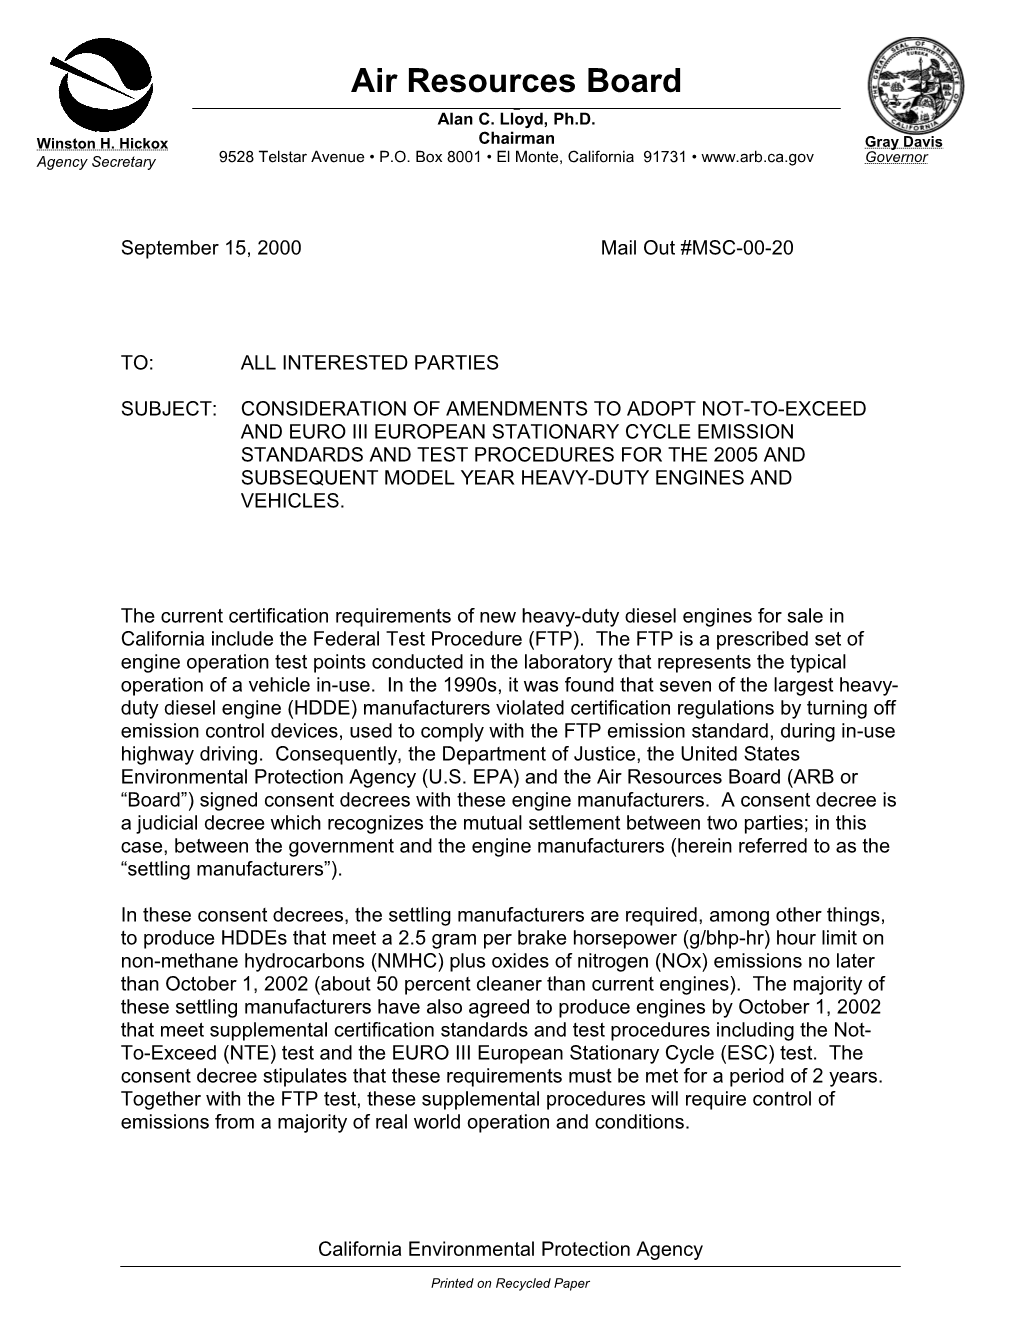 2005 HDDE Rulemaking Mailout